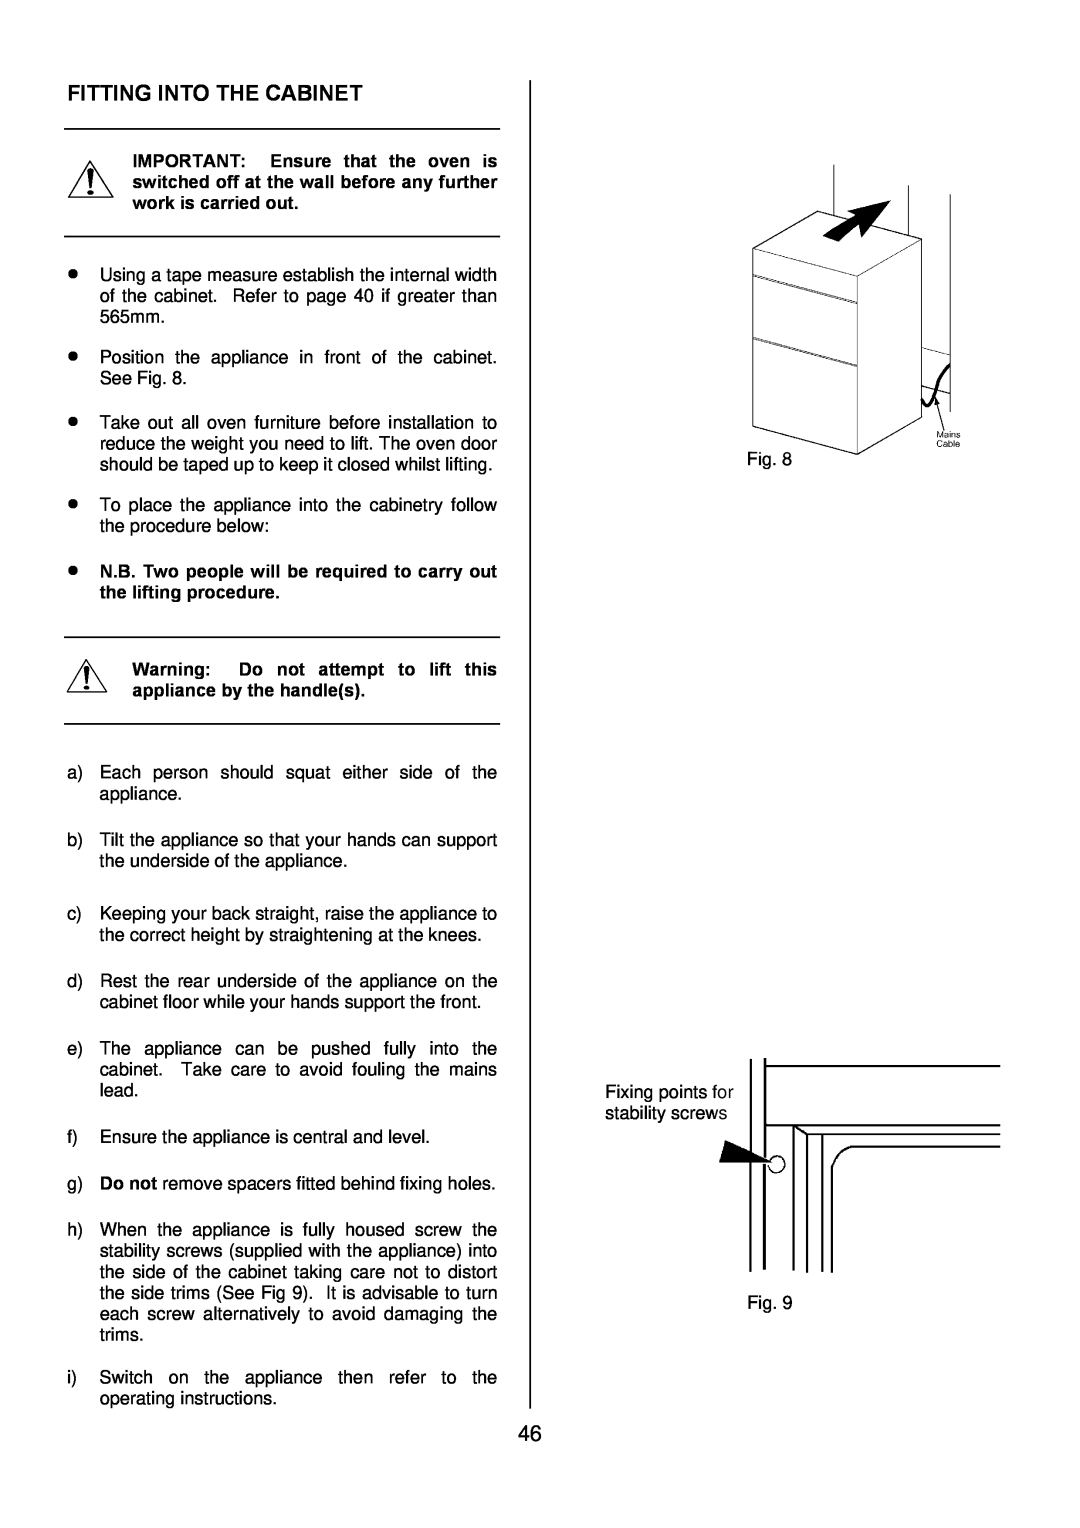 Zanussi ZOD 685 manual Fitting Into The Cabinet, N.B. Two people will be required to carry out the lifting procedure 